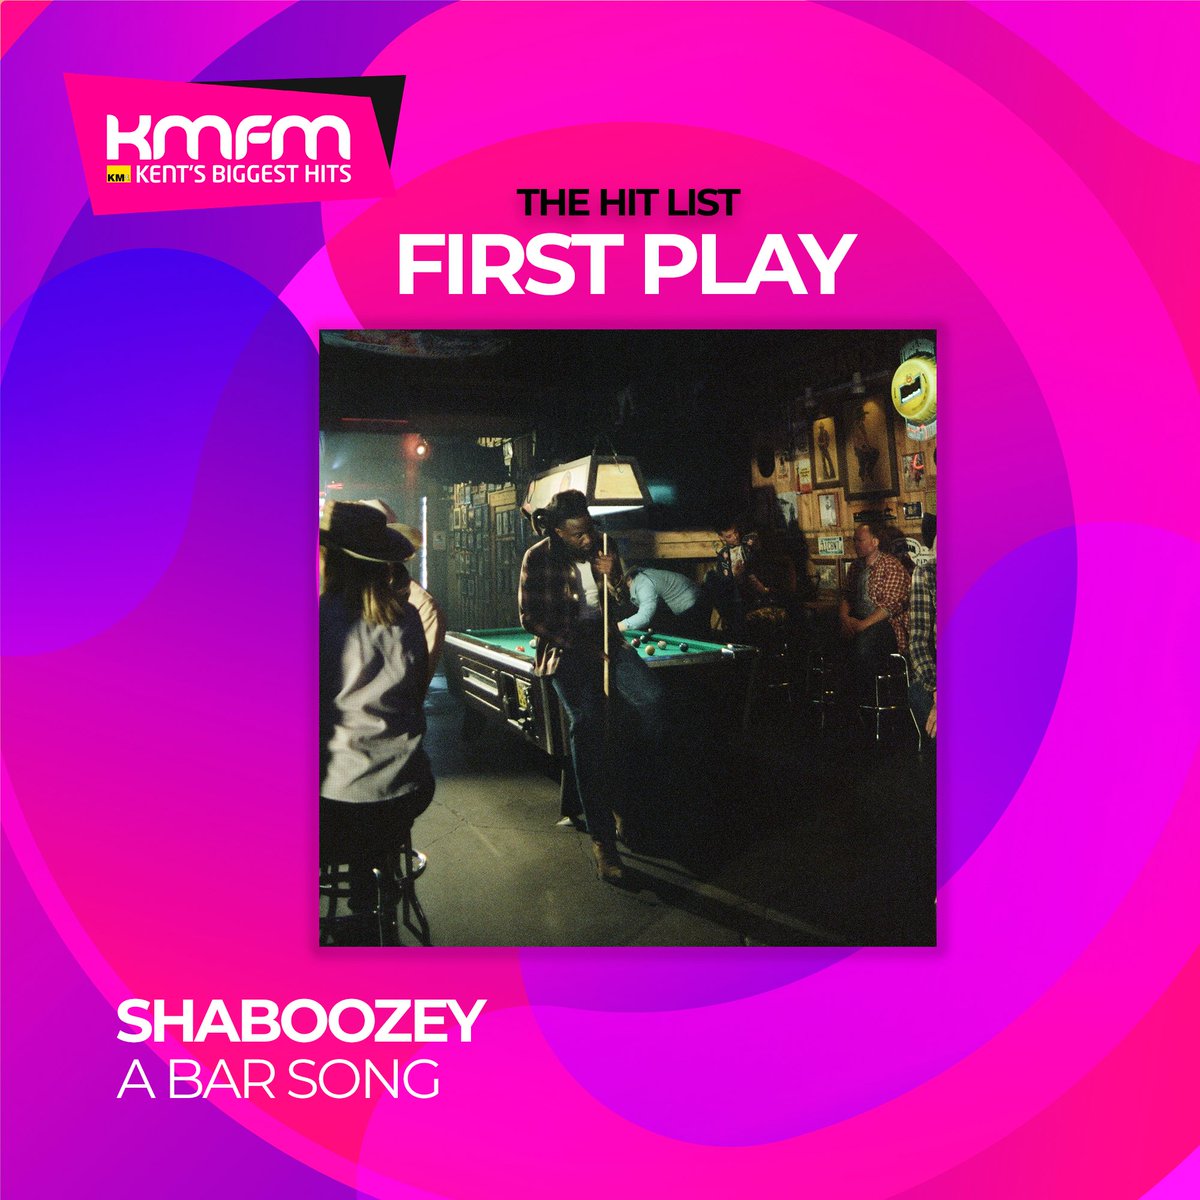 🔥 Tonight's #FirstPlay is one of the biggest trending sounds on Instagram right now.

@ShaboozeysJeans is bringing his folky infused r&b vibes with this one! #ABarSong is tonight's #FirstPlay across #Kent.

Hear it ➡️ kmfm.co.uk/player 🔊